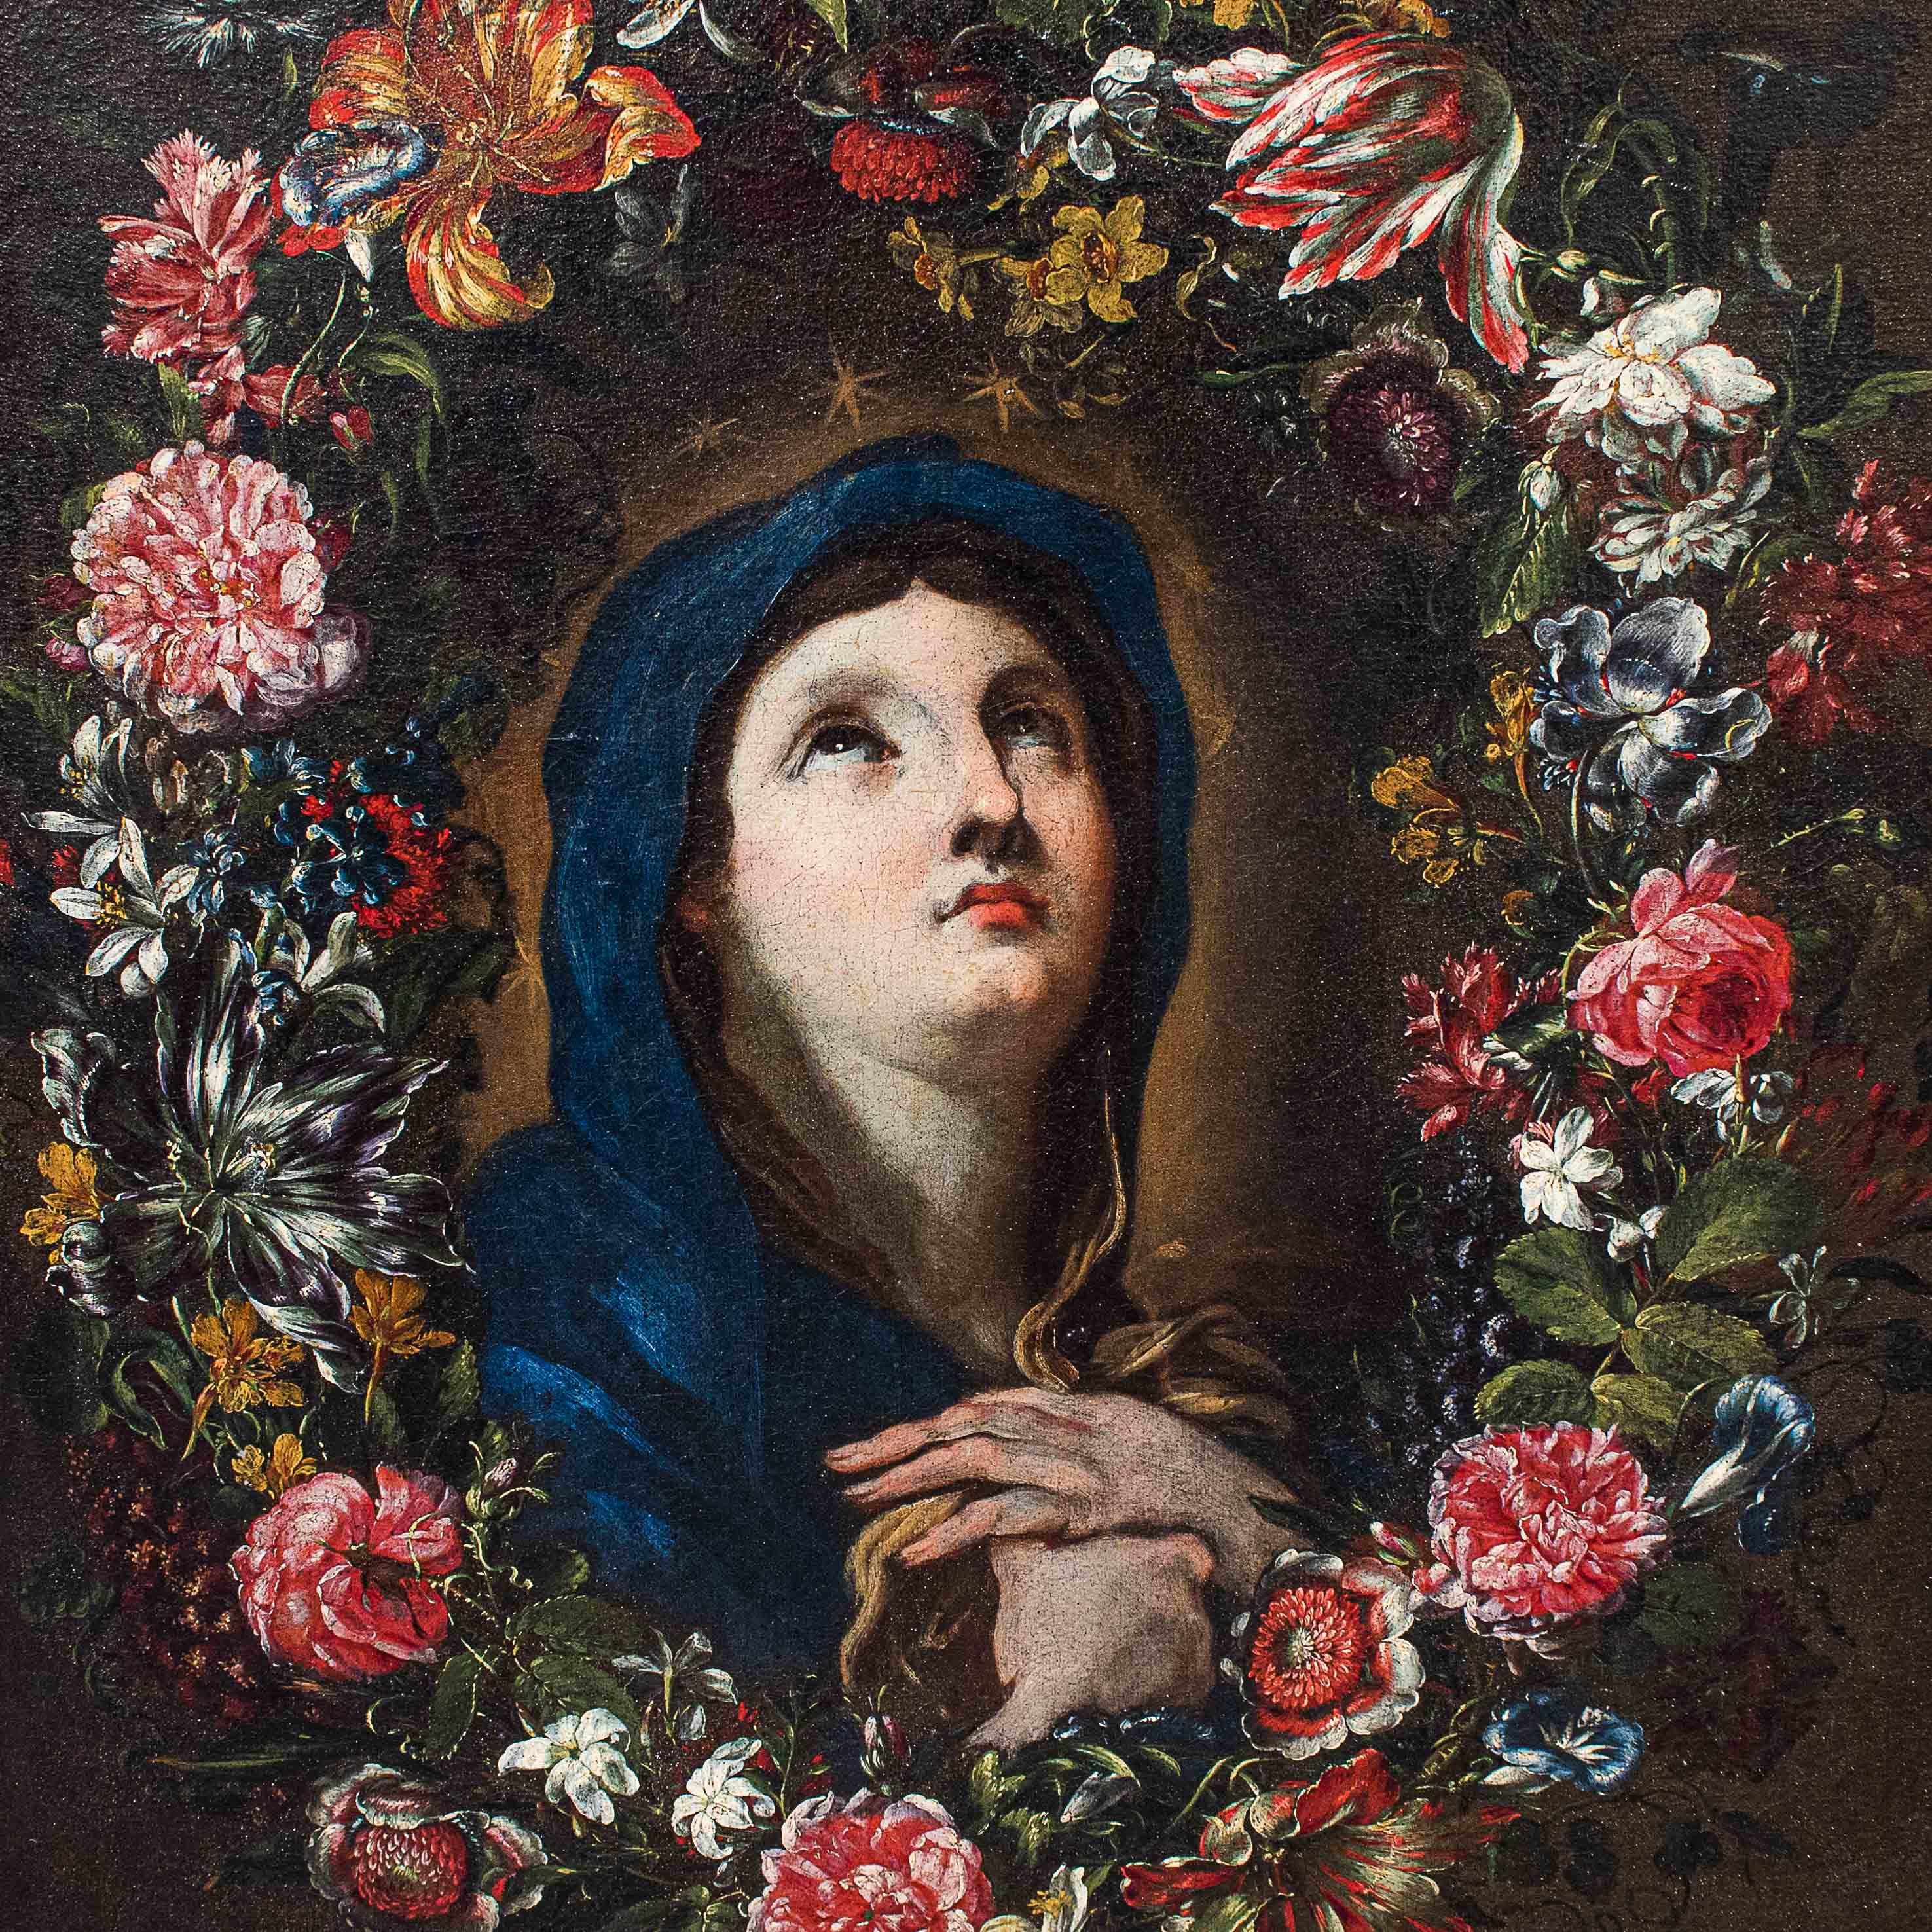 Italian 17th-18th Century Virgin with in Garland of Flowers Painting Oil on Canvas